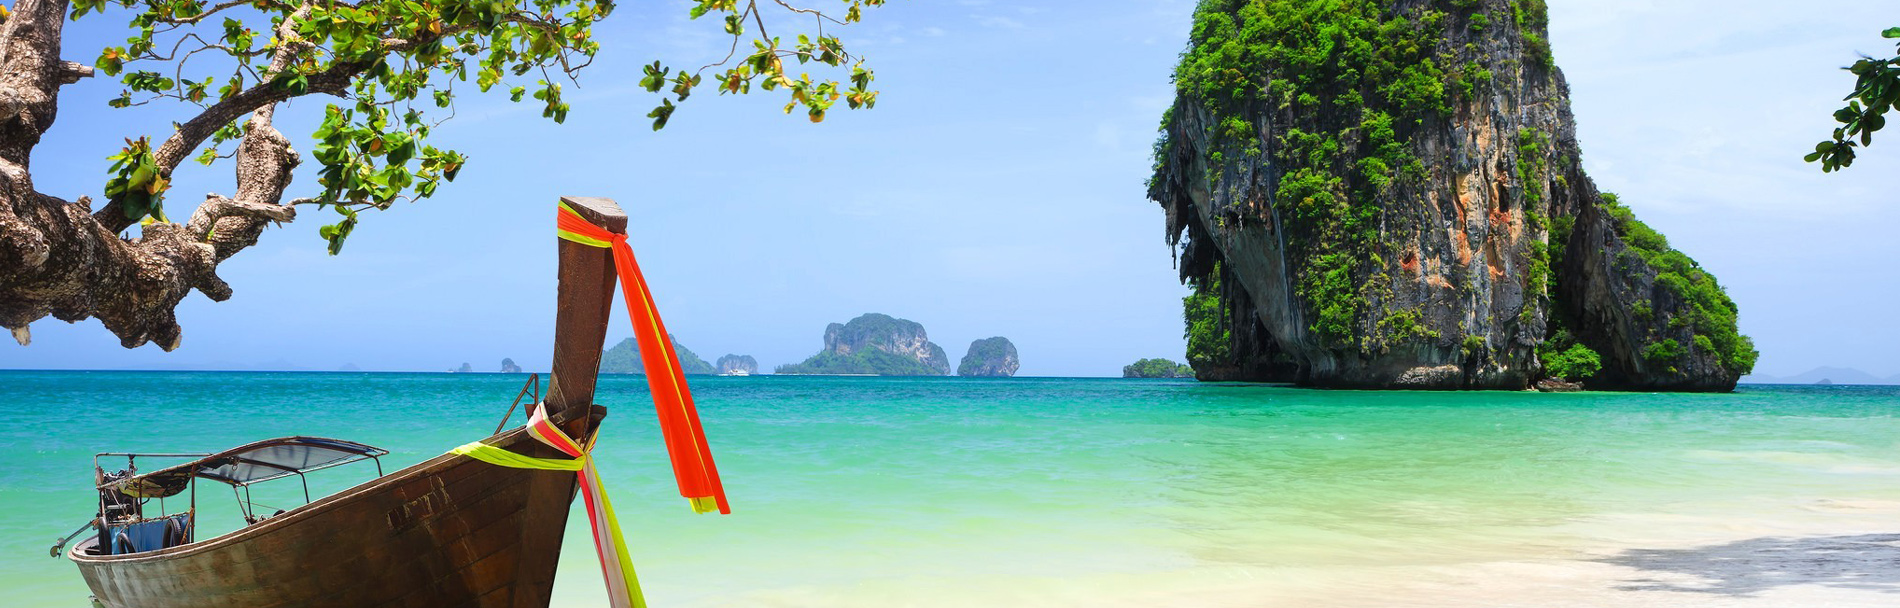 Thailand Tour Package - 6 Nights